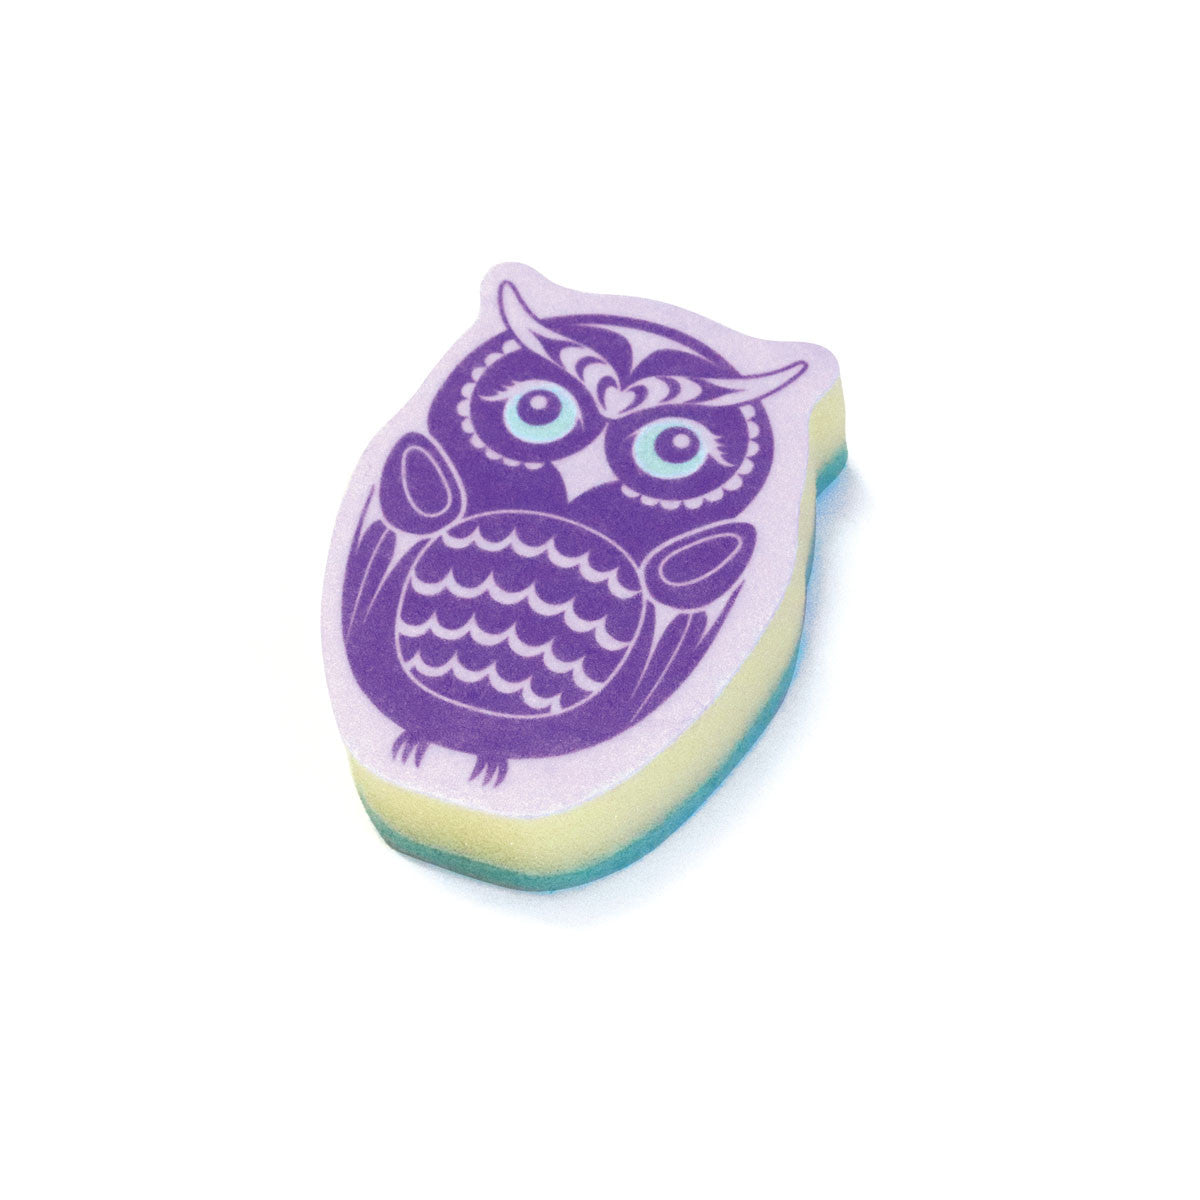 Sponge - Owl by Simone Diamon-Sponge-Native Northwest-[kids game]-[locally designed in bc]-[best gift for kids]-All The Good Things From BC